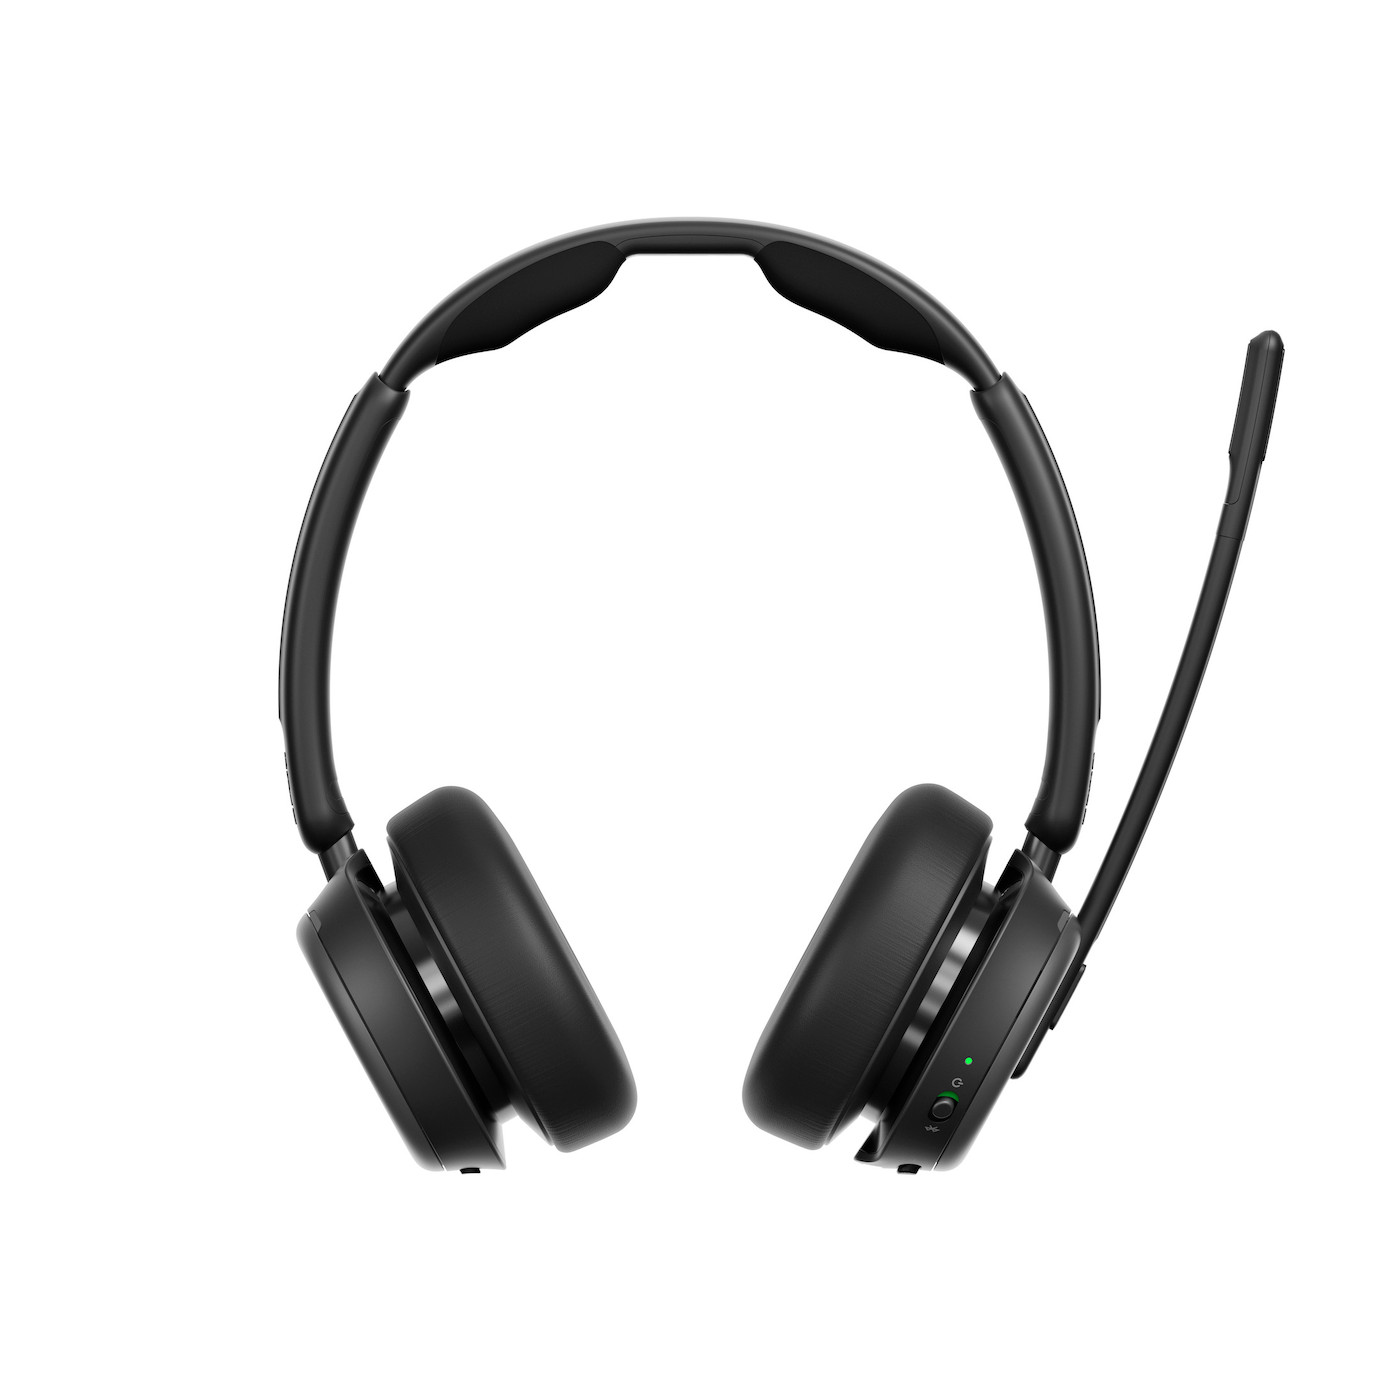 EPOS IMPACT 1060 ANC Stereo Bluetooth Headset mit Active Noice Cancelling (ANC)